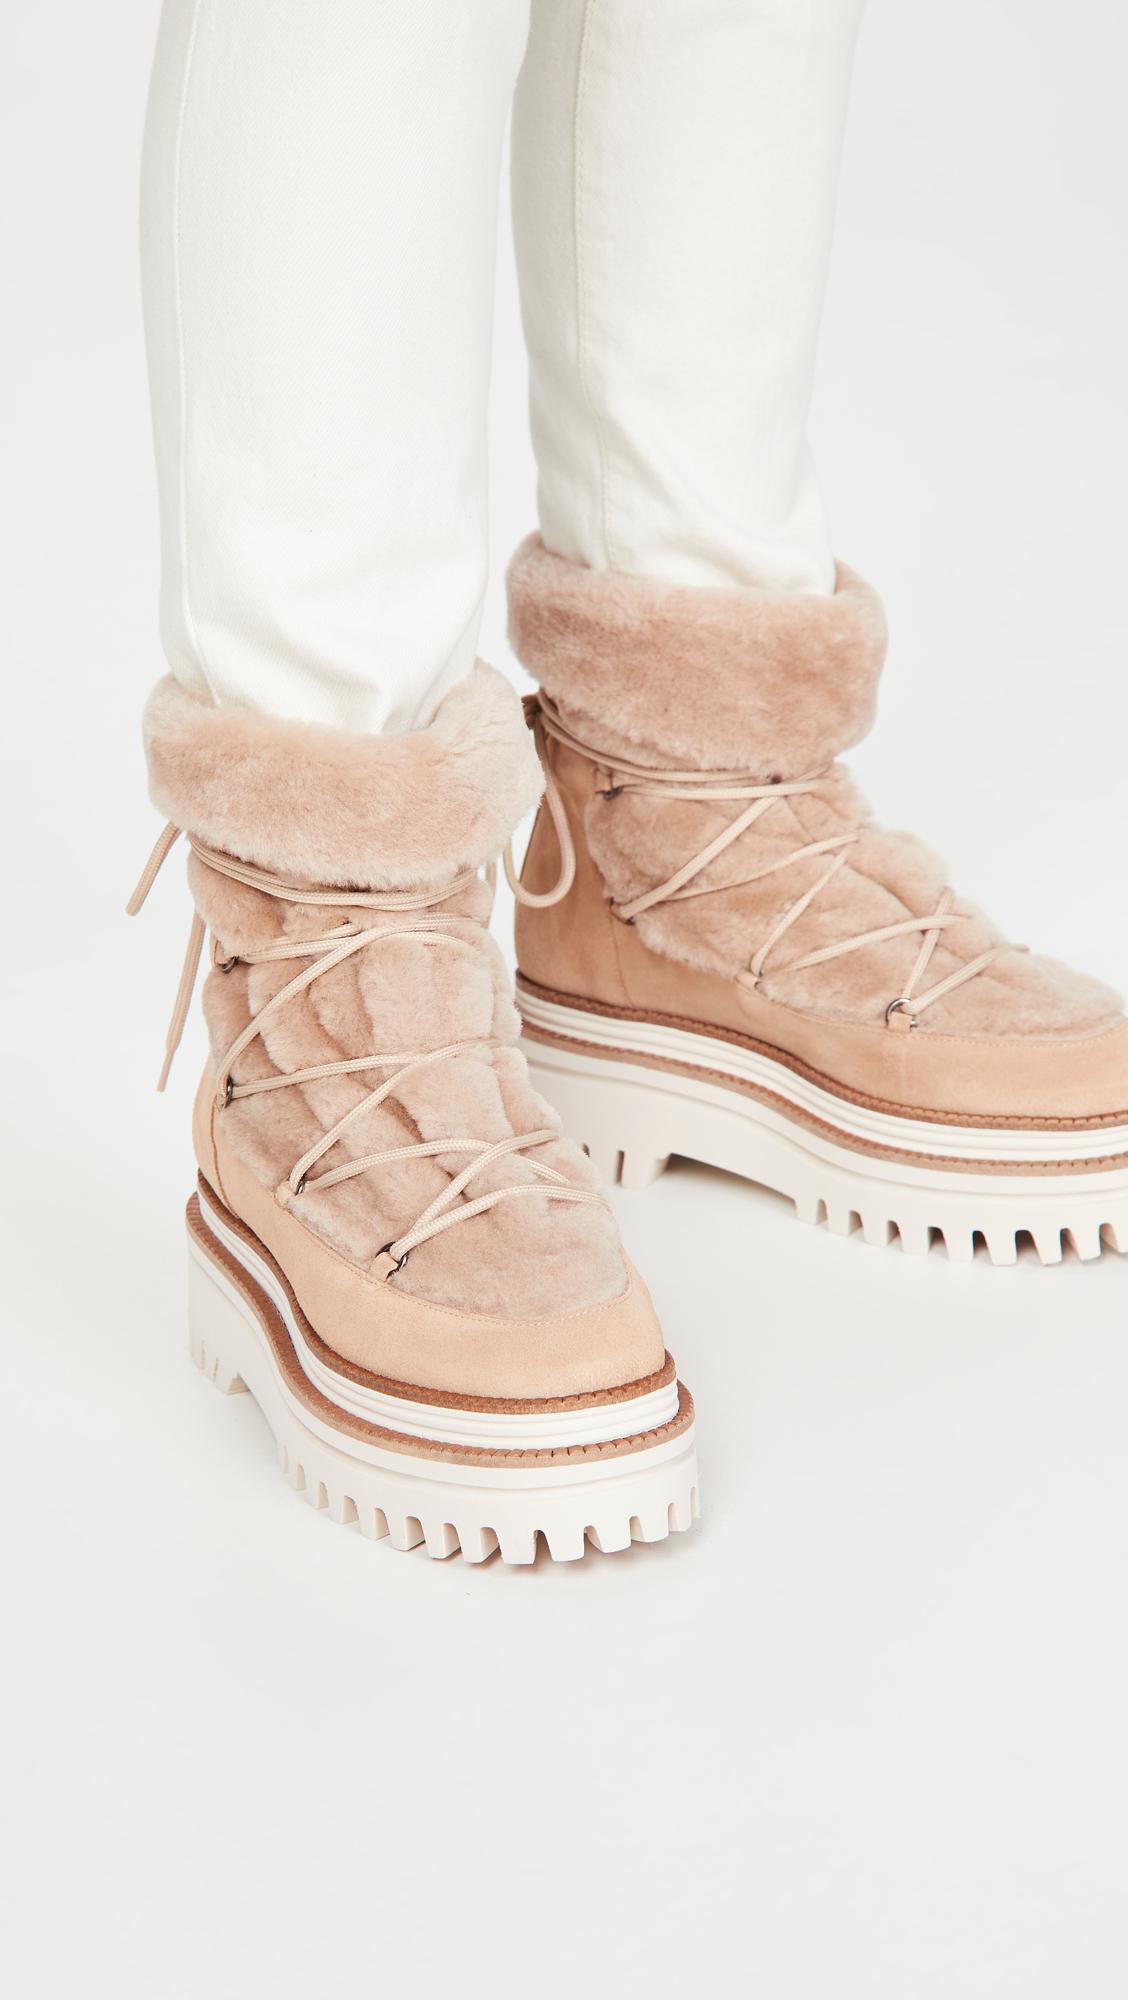 Paloma Barceló Leather Nazare Shearling Boots in Natural | Lyst